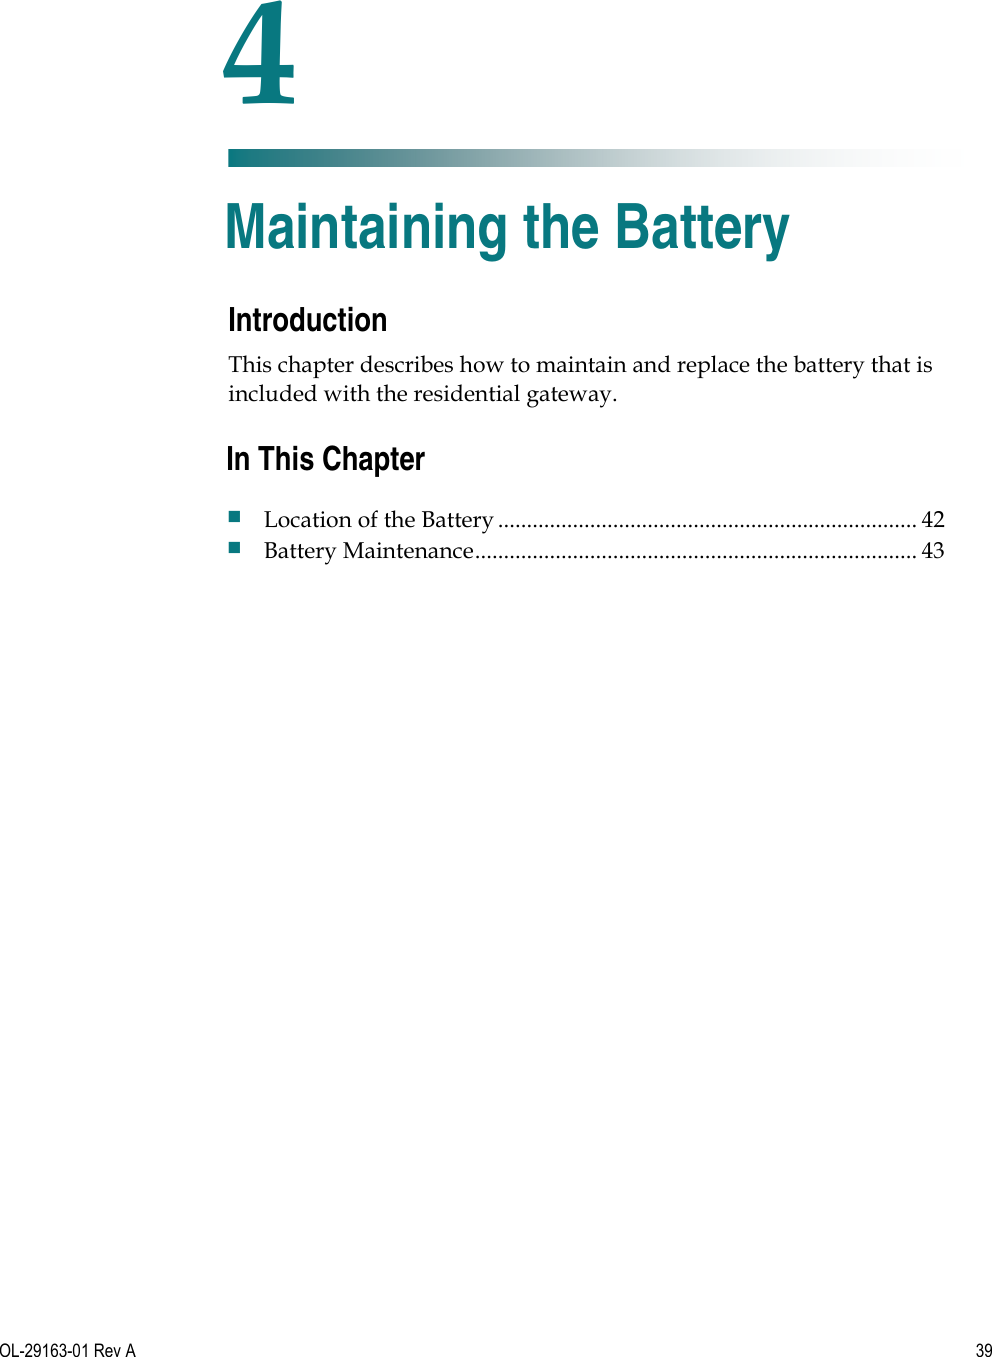   OL-29163-01 Rev A  439  Introduction This chapter describes how to maintain and replace the battery that is included with the residential gateway.     4 Chapter 4 Maintaining the Battery In This Chapter  Location of the Battery ......................................................................... 42  Battery Maintenance ............................................................................. 43 